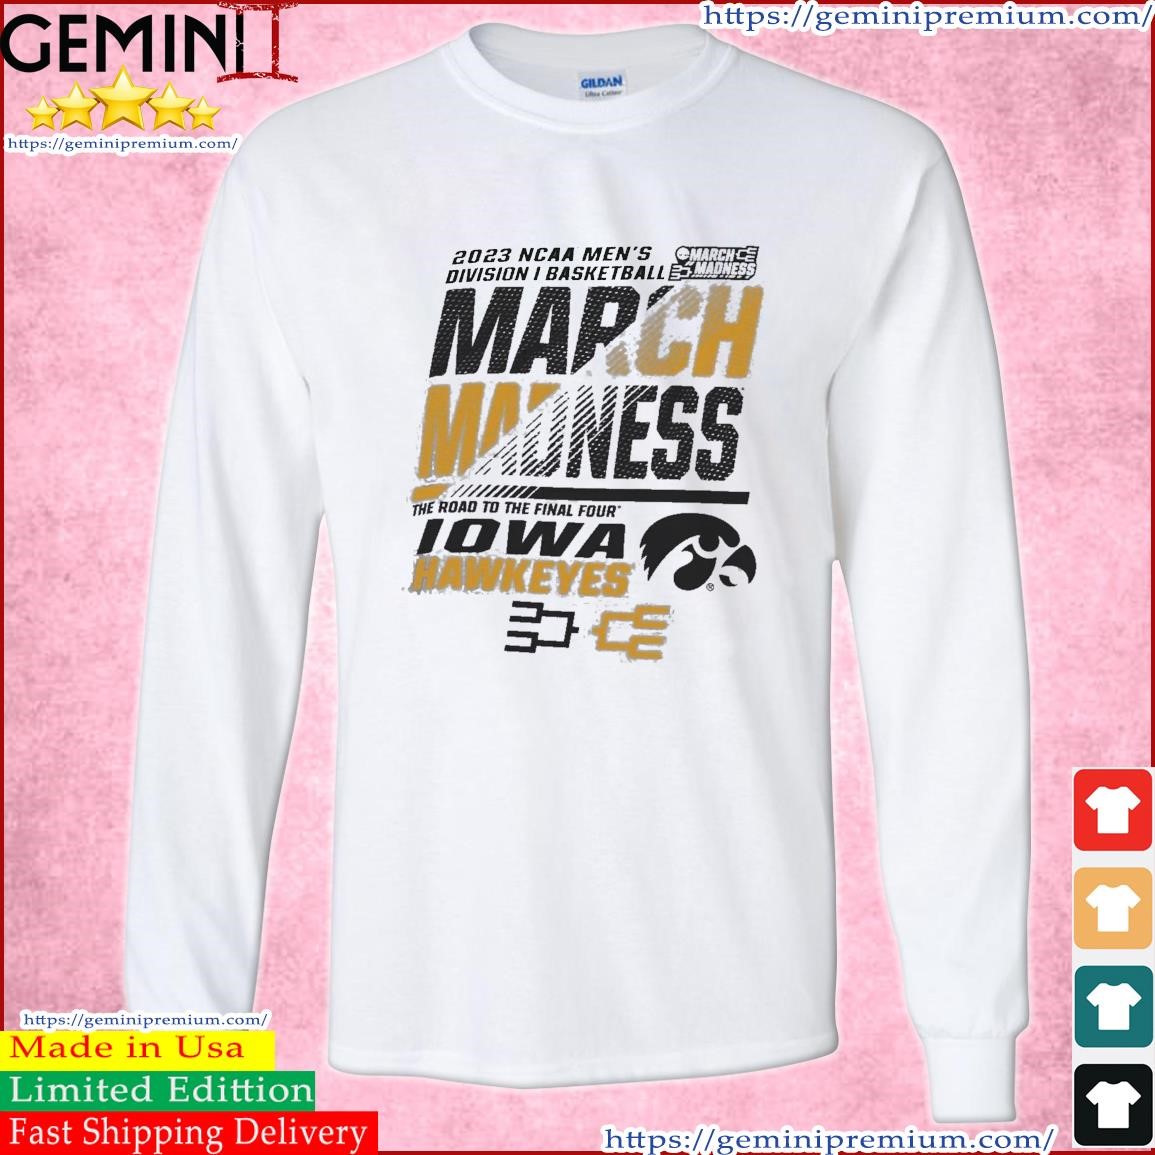 Iowa Hawkeyes Men's Basketball 2023 NCAA March Madness The Road To Final Four Shirt Long Sleeve Tee.jpg